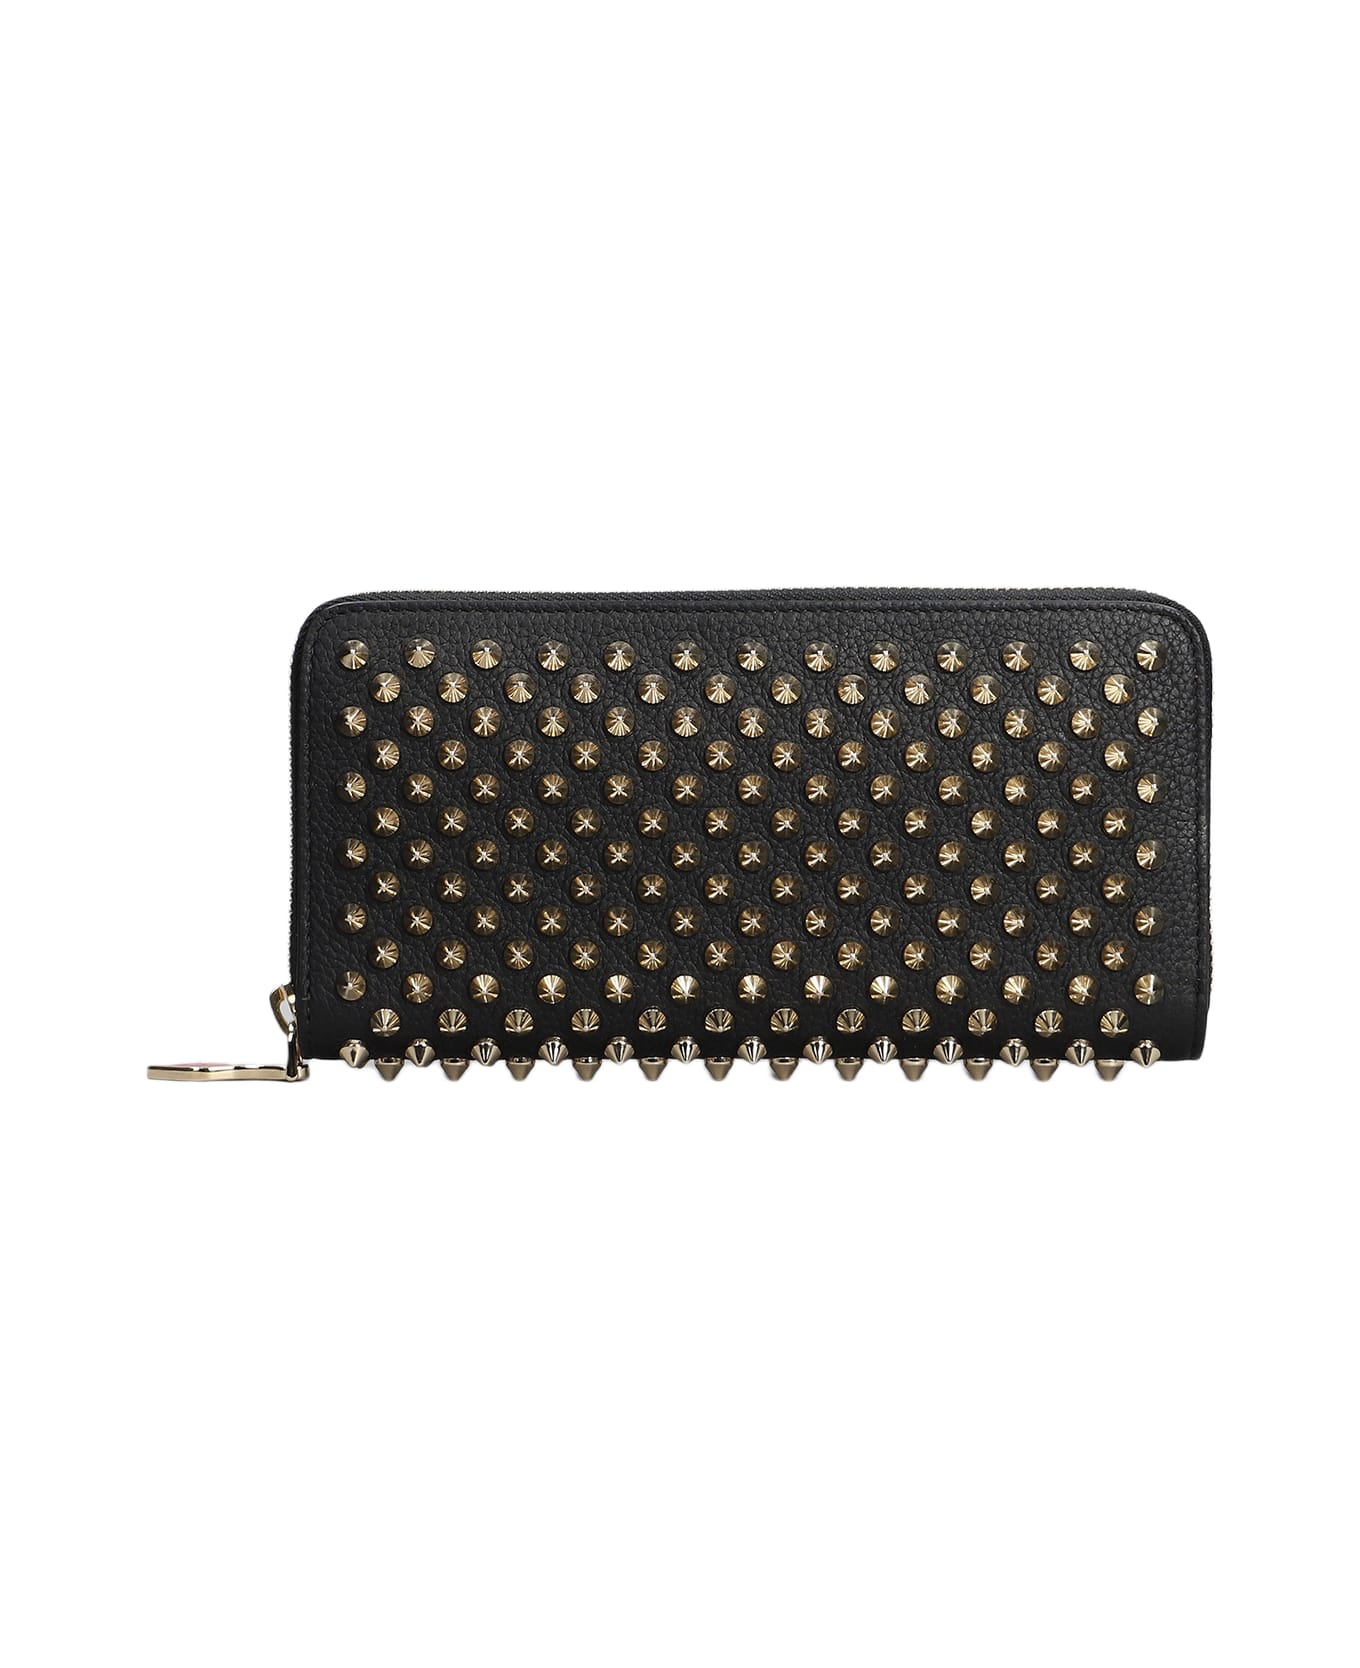 Christian Louboutin Panettone Wallet In Black Leather - Black 財布